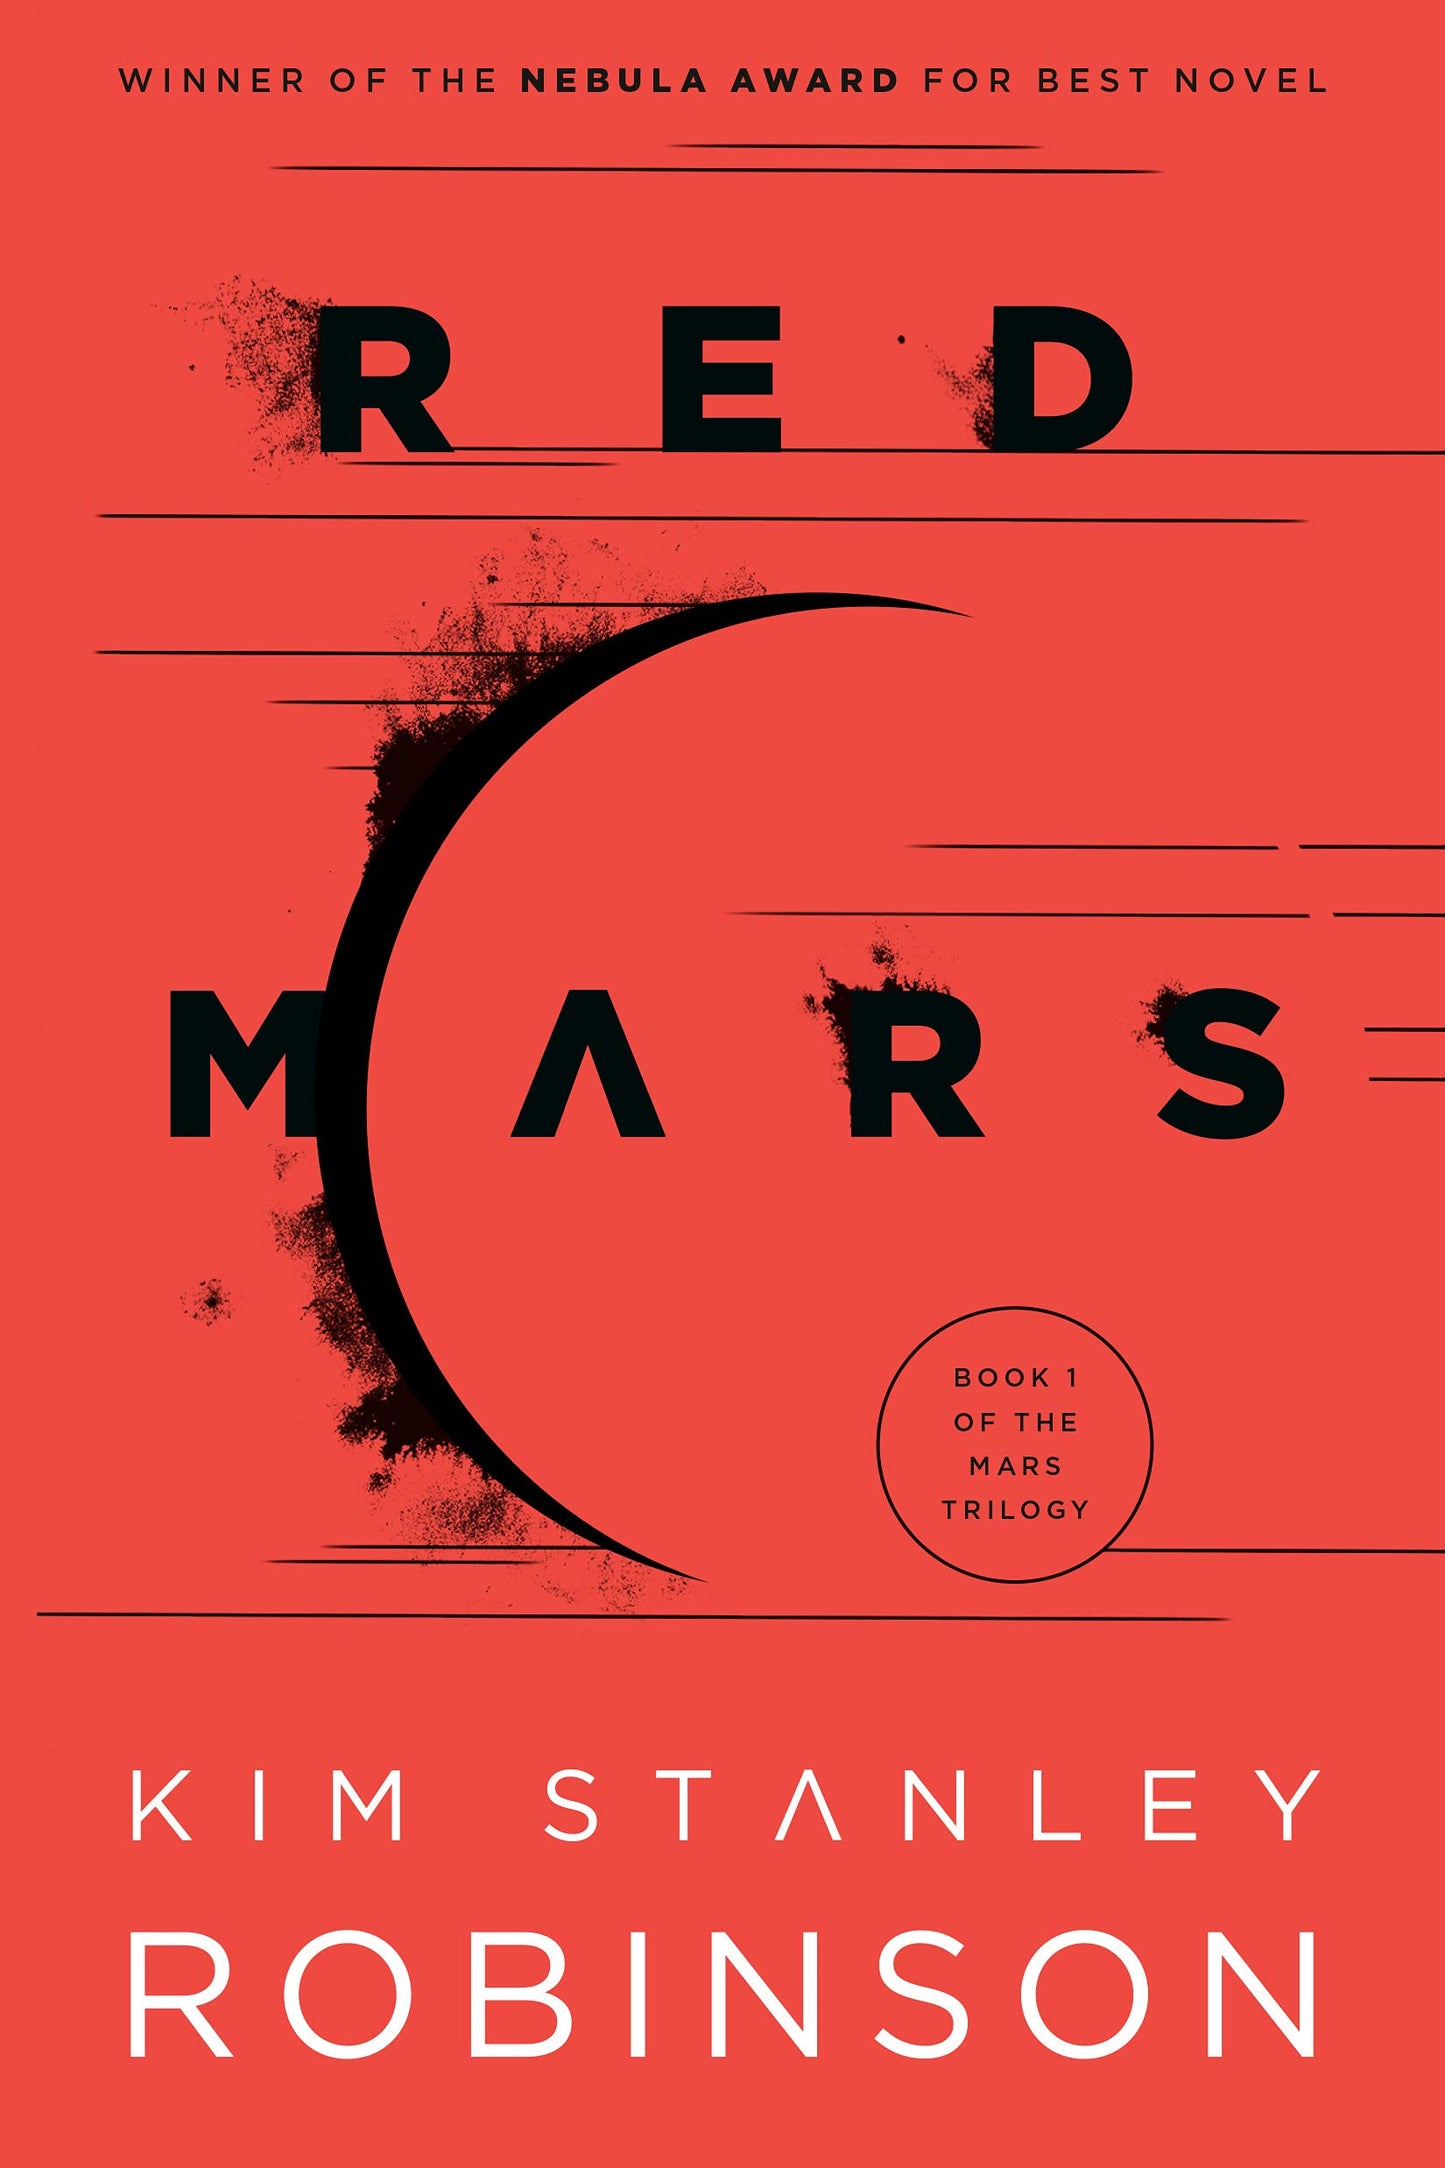 Red Mars: Book 1